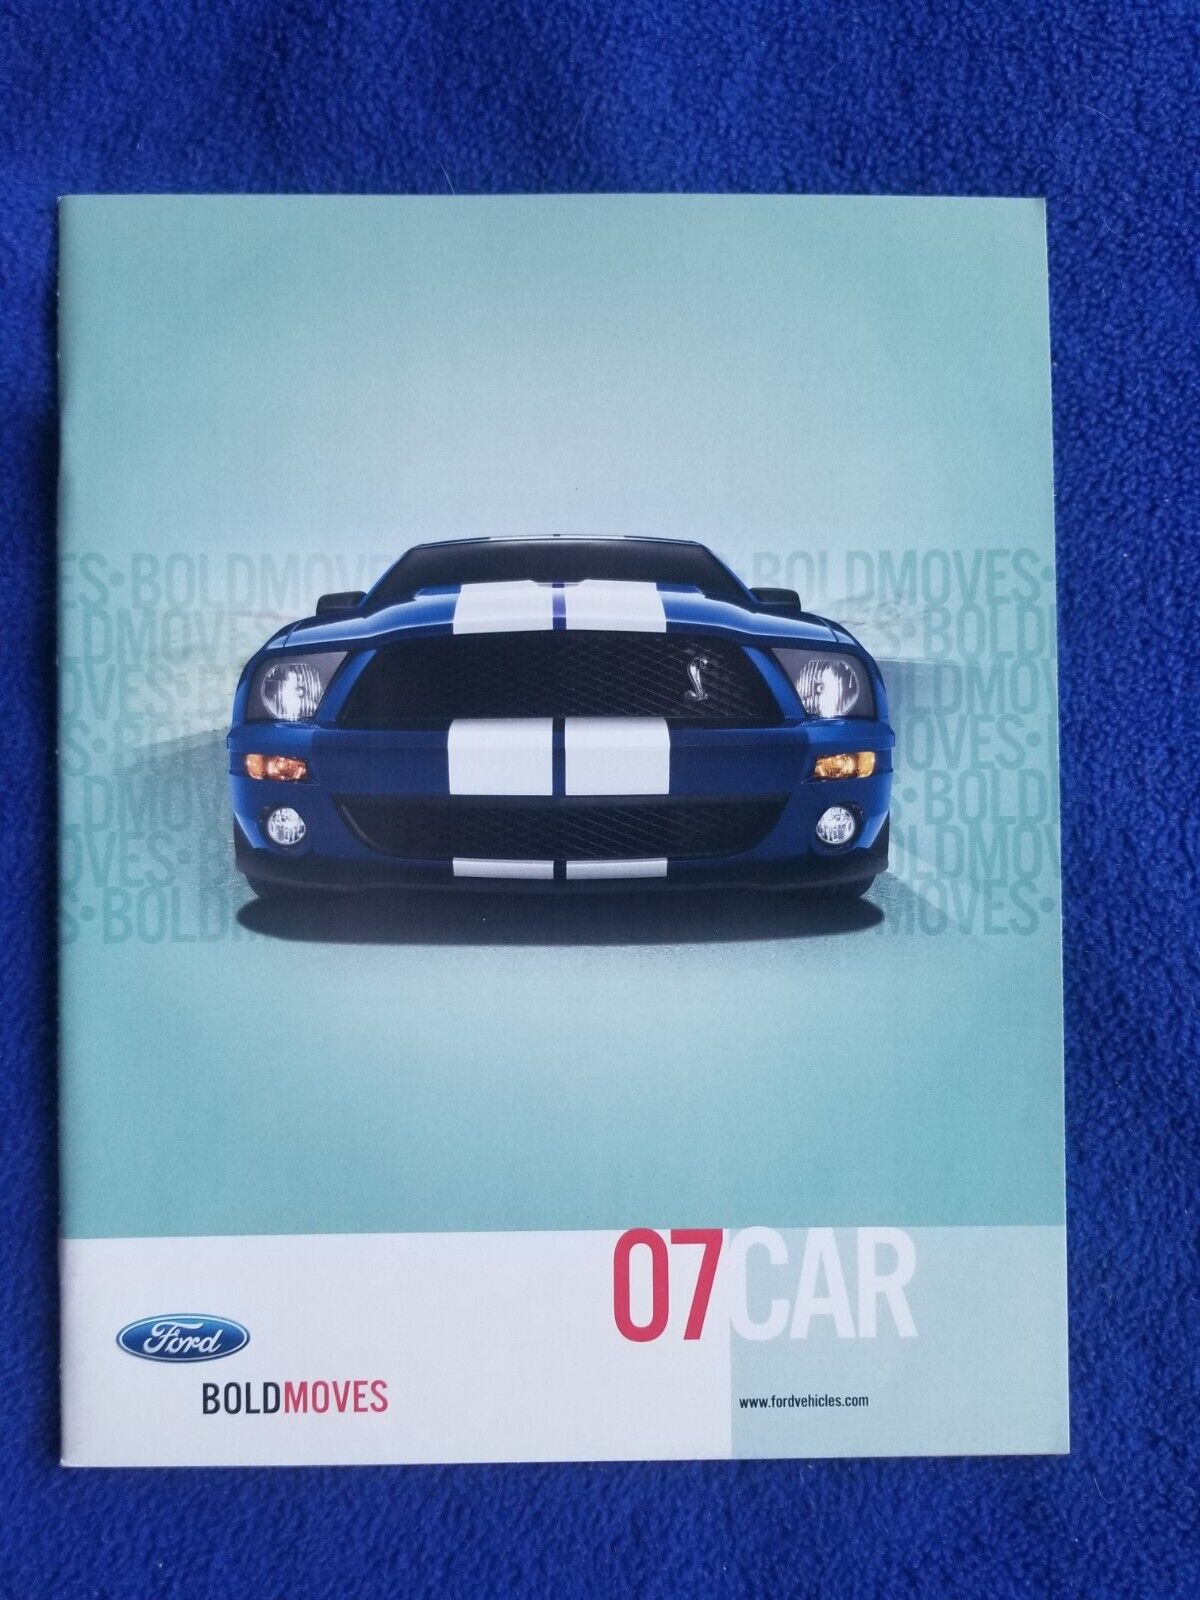 2007 FORD CAR BOLD MOVES    SALES BROCHURE NEW